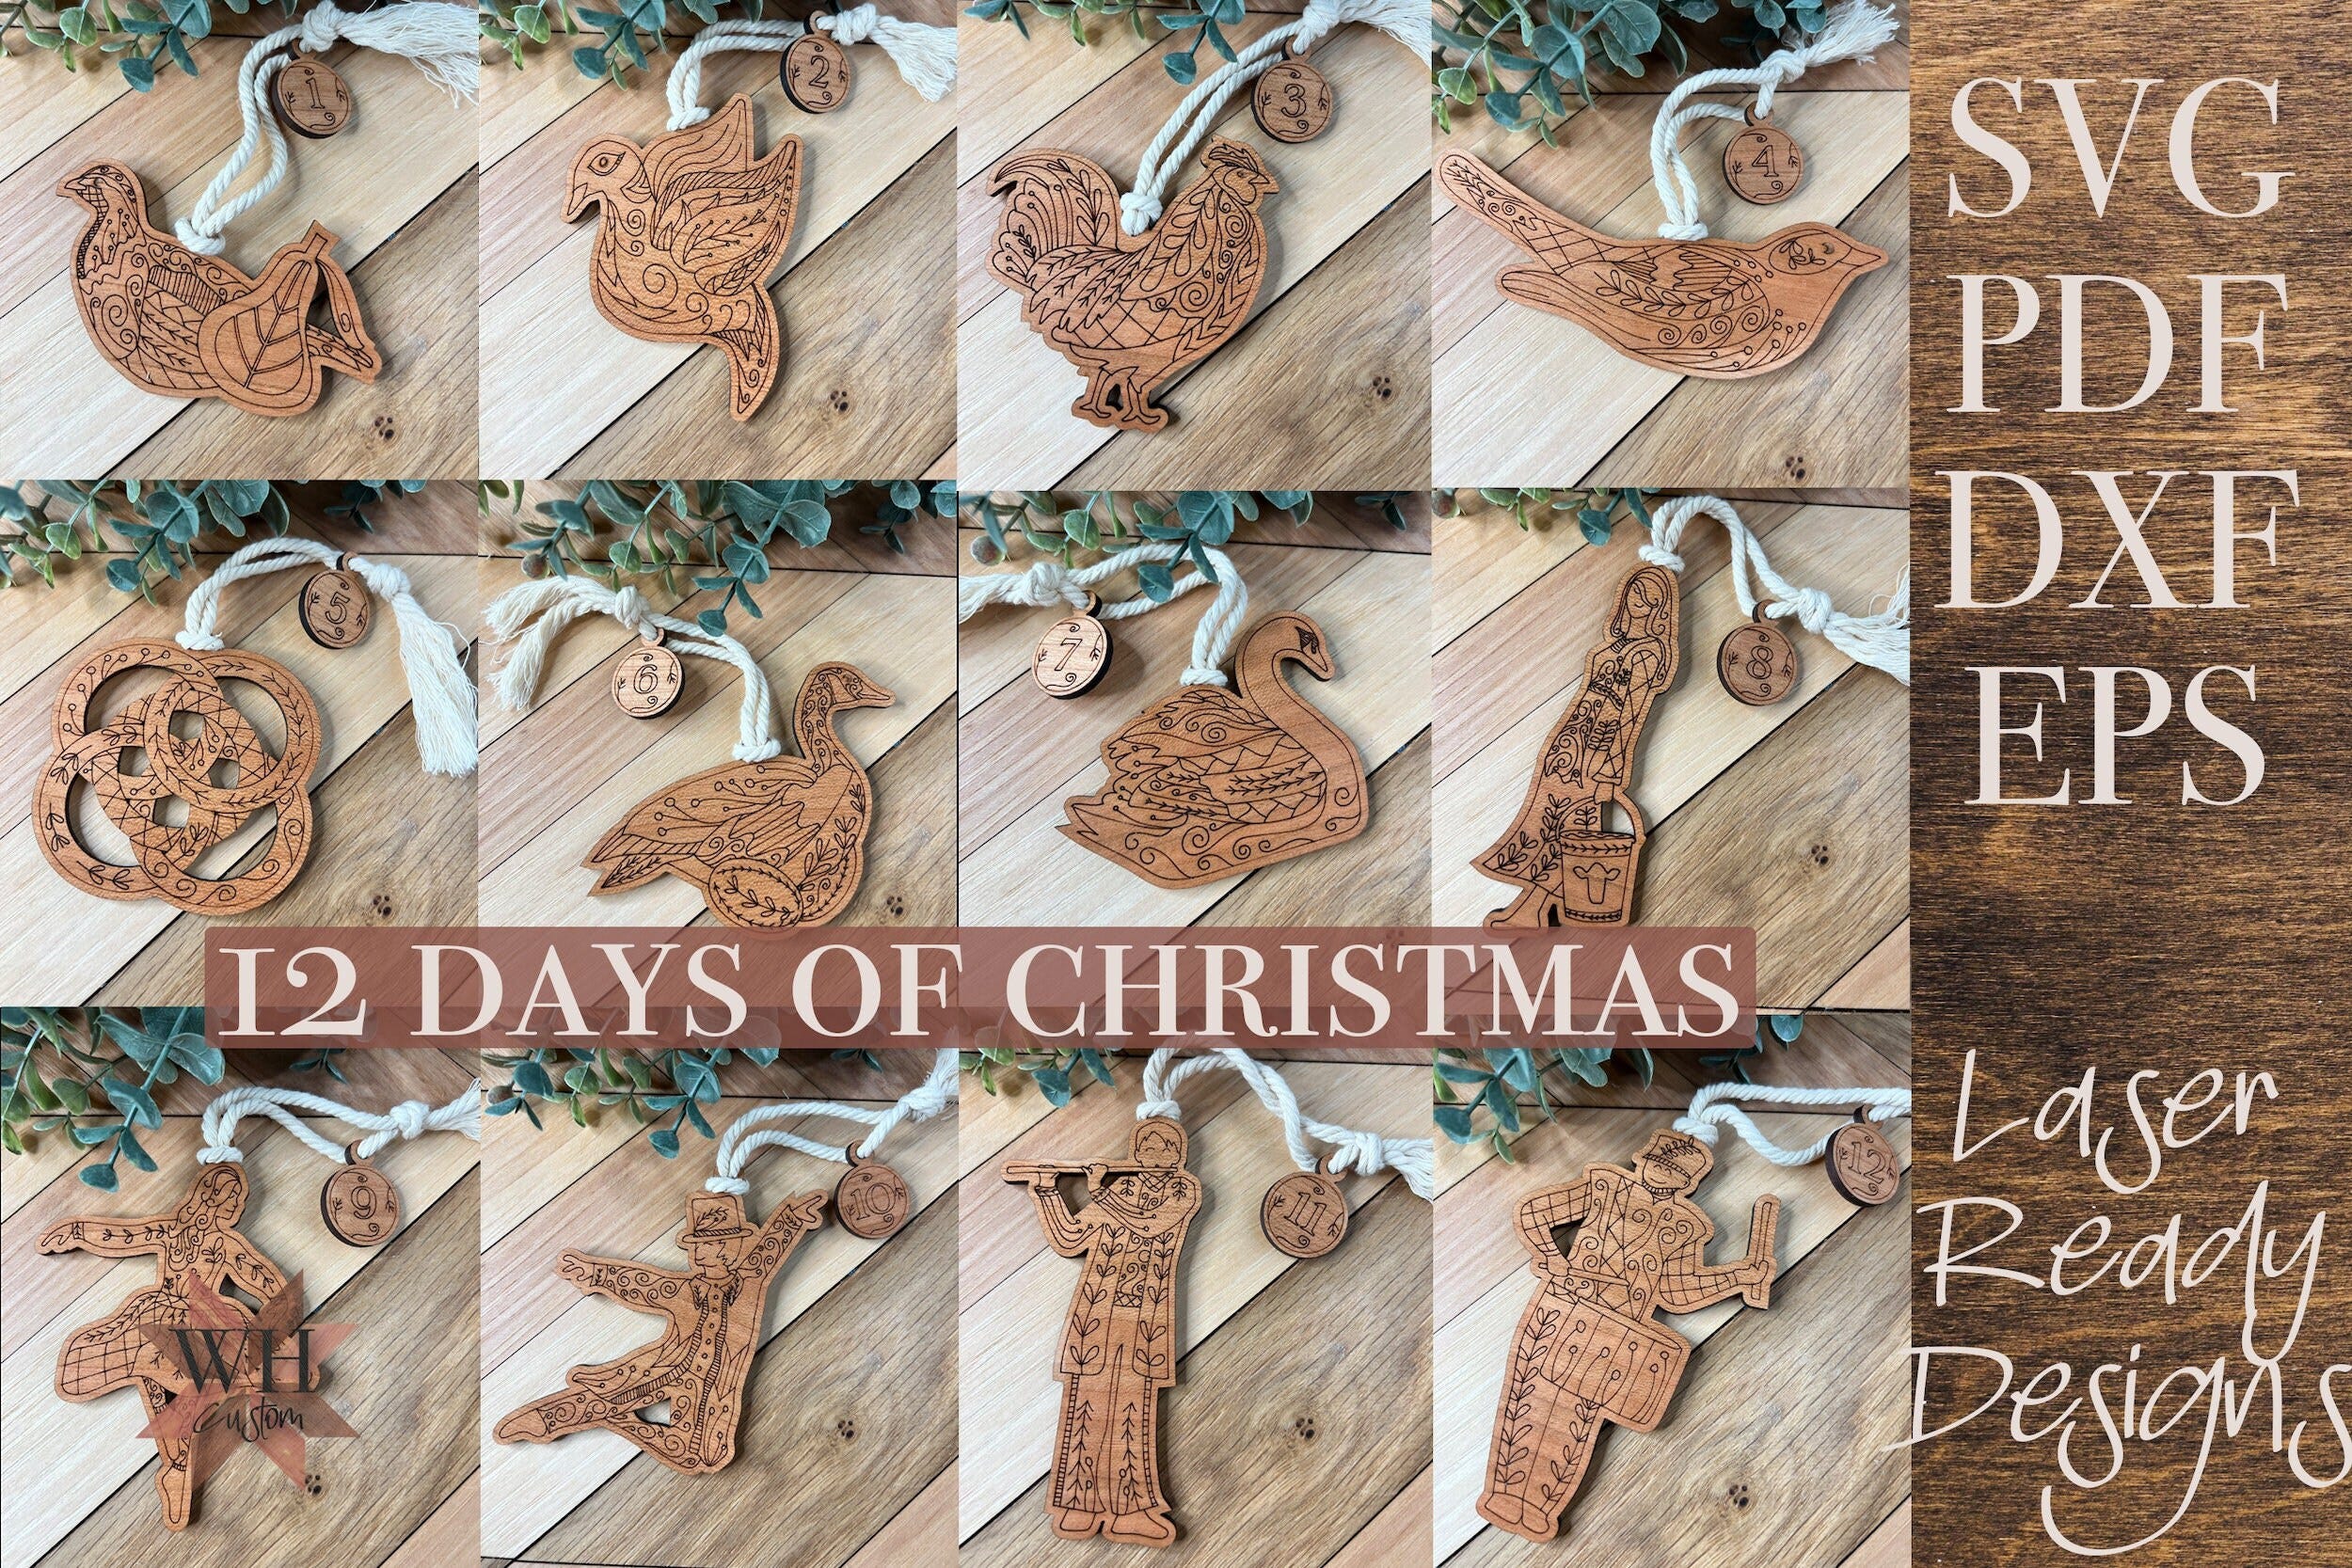 Ornaments SVG laser cut files - 12 Days of Christmas for lasers like Glowforge - boho whimsical doodle - scored design - welcome home custom